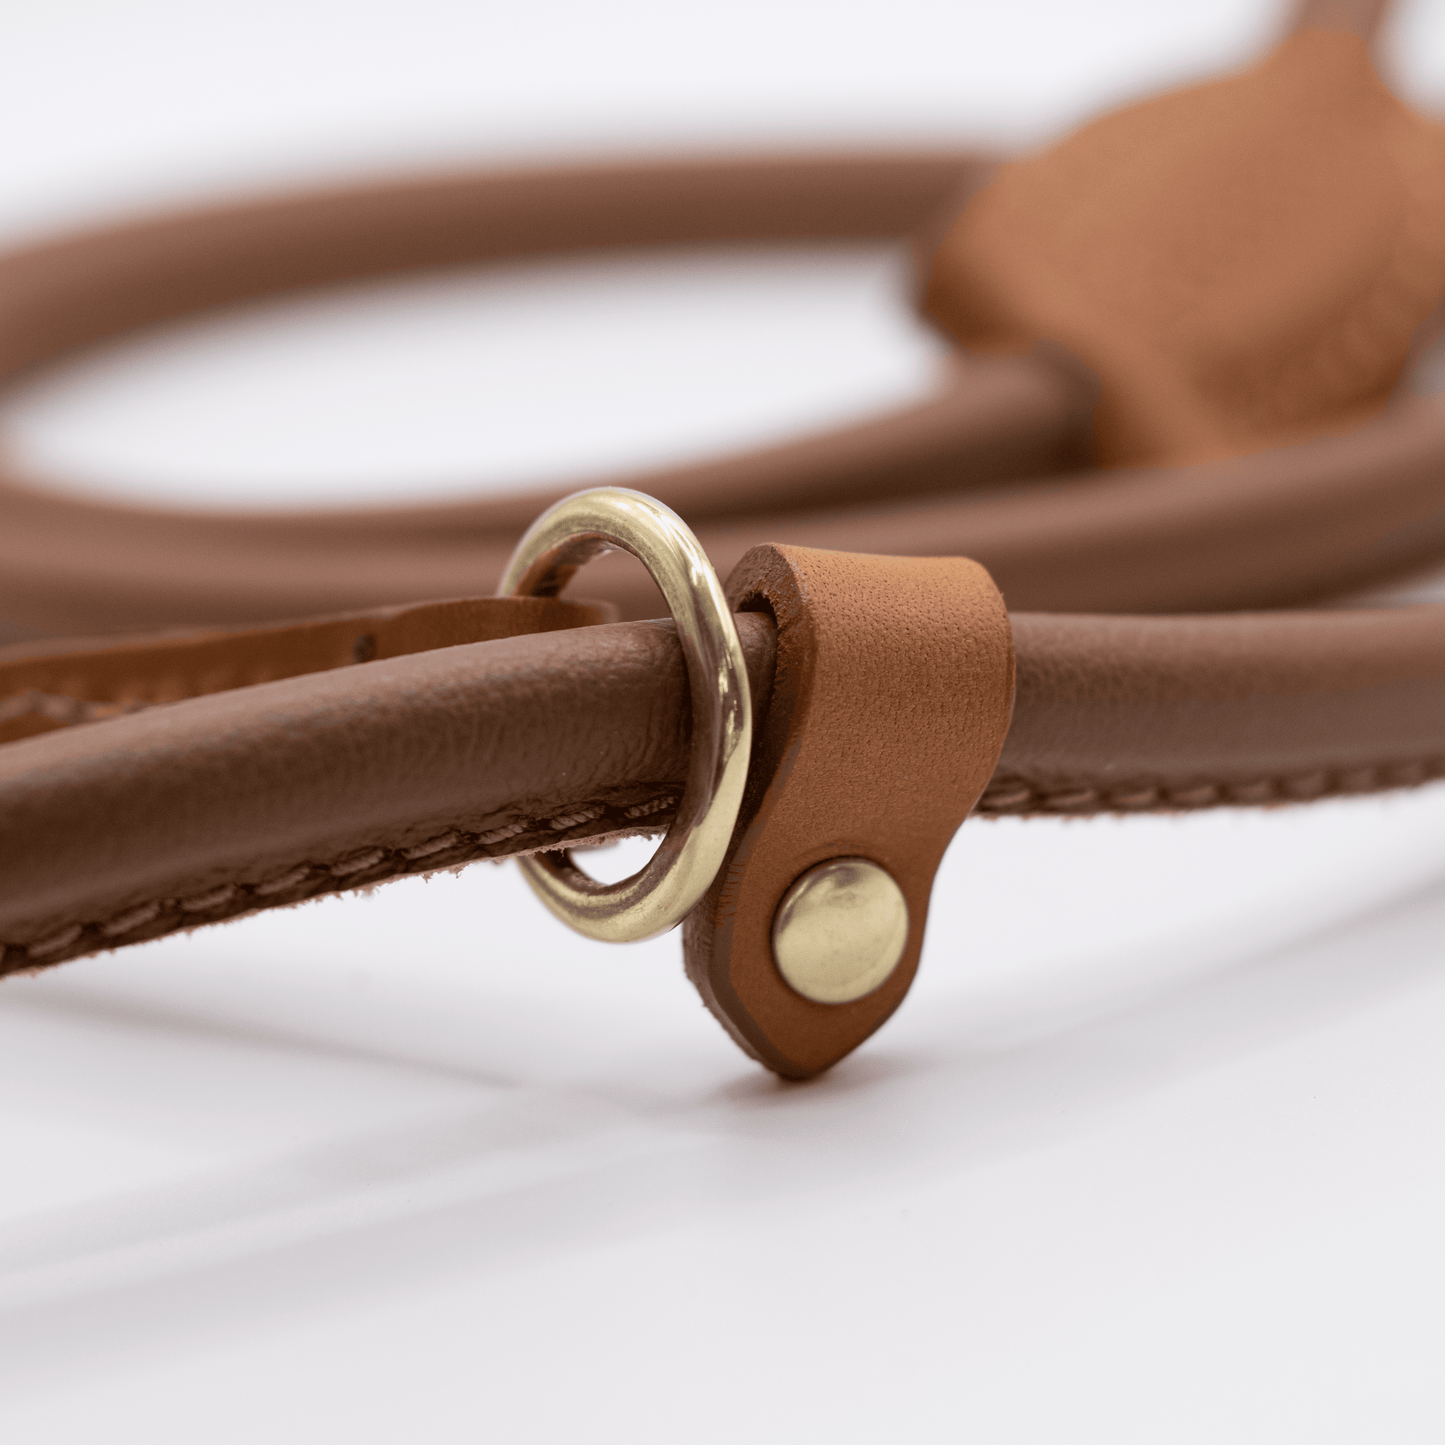 D&H Rolled Soft Leather Slip Lead Tan